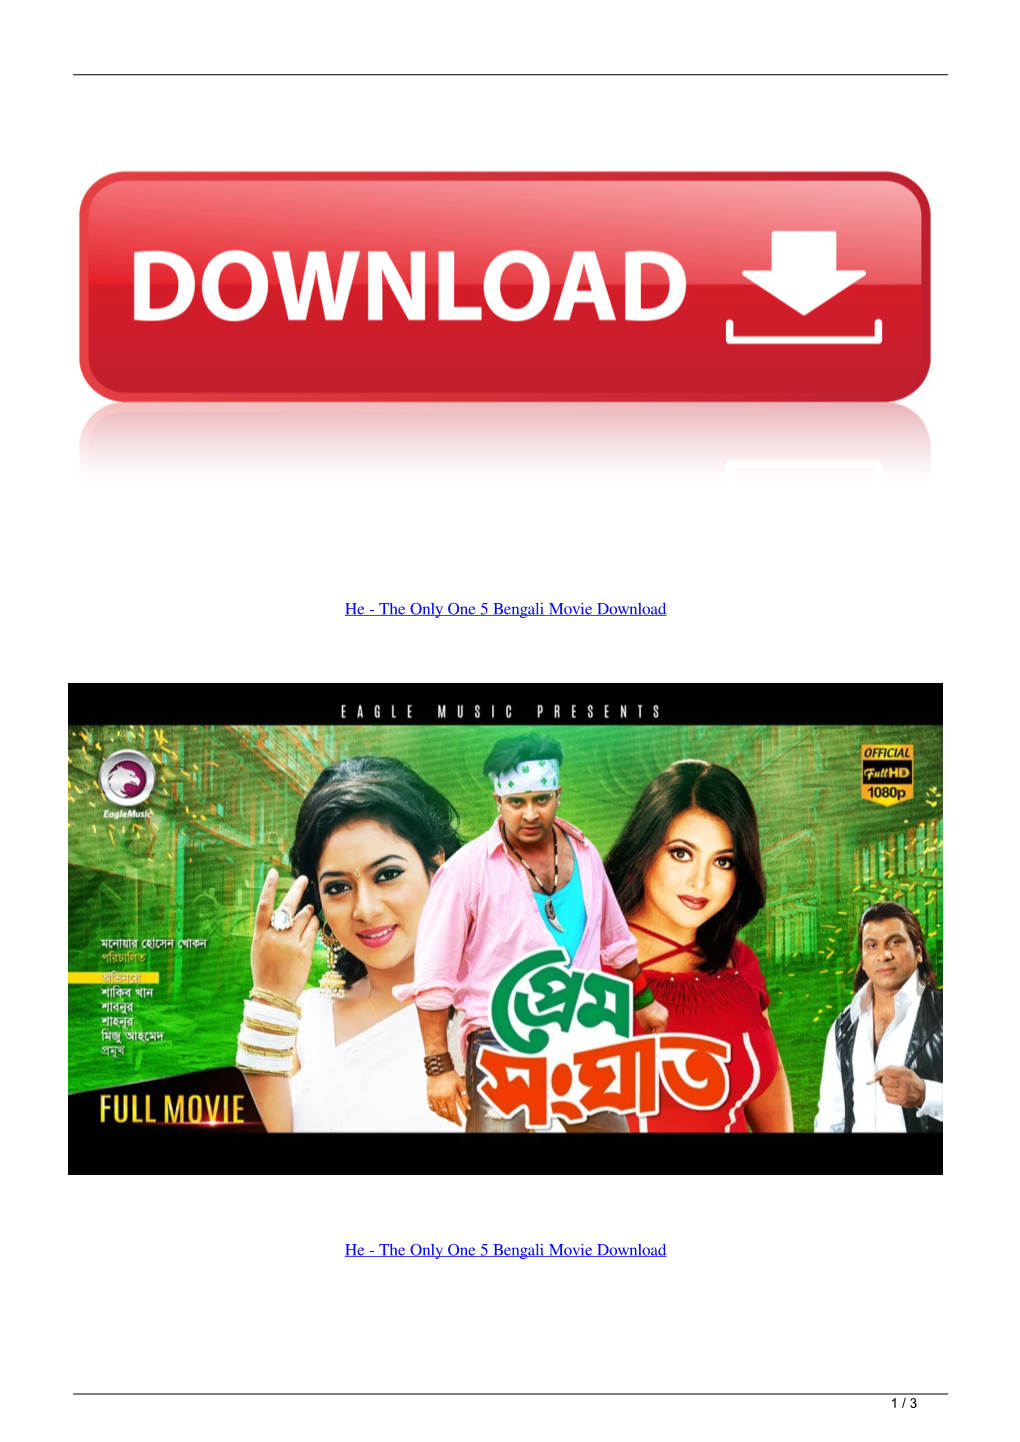 He the Only One 5 Bengali Movie Download